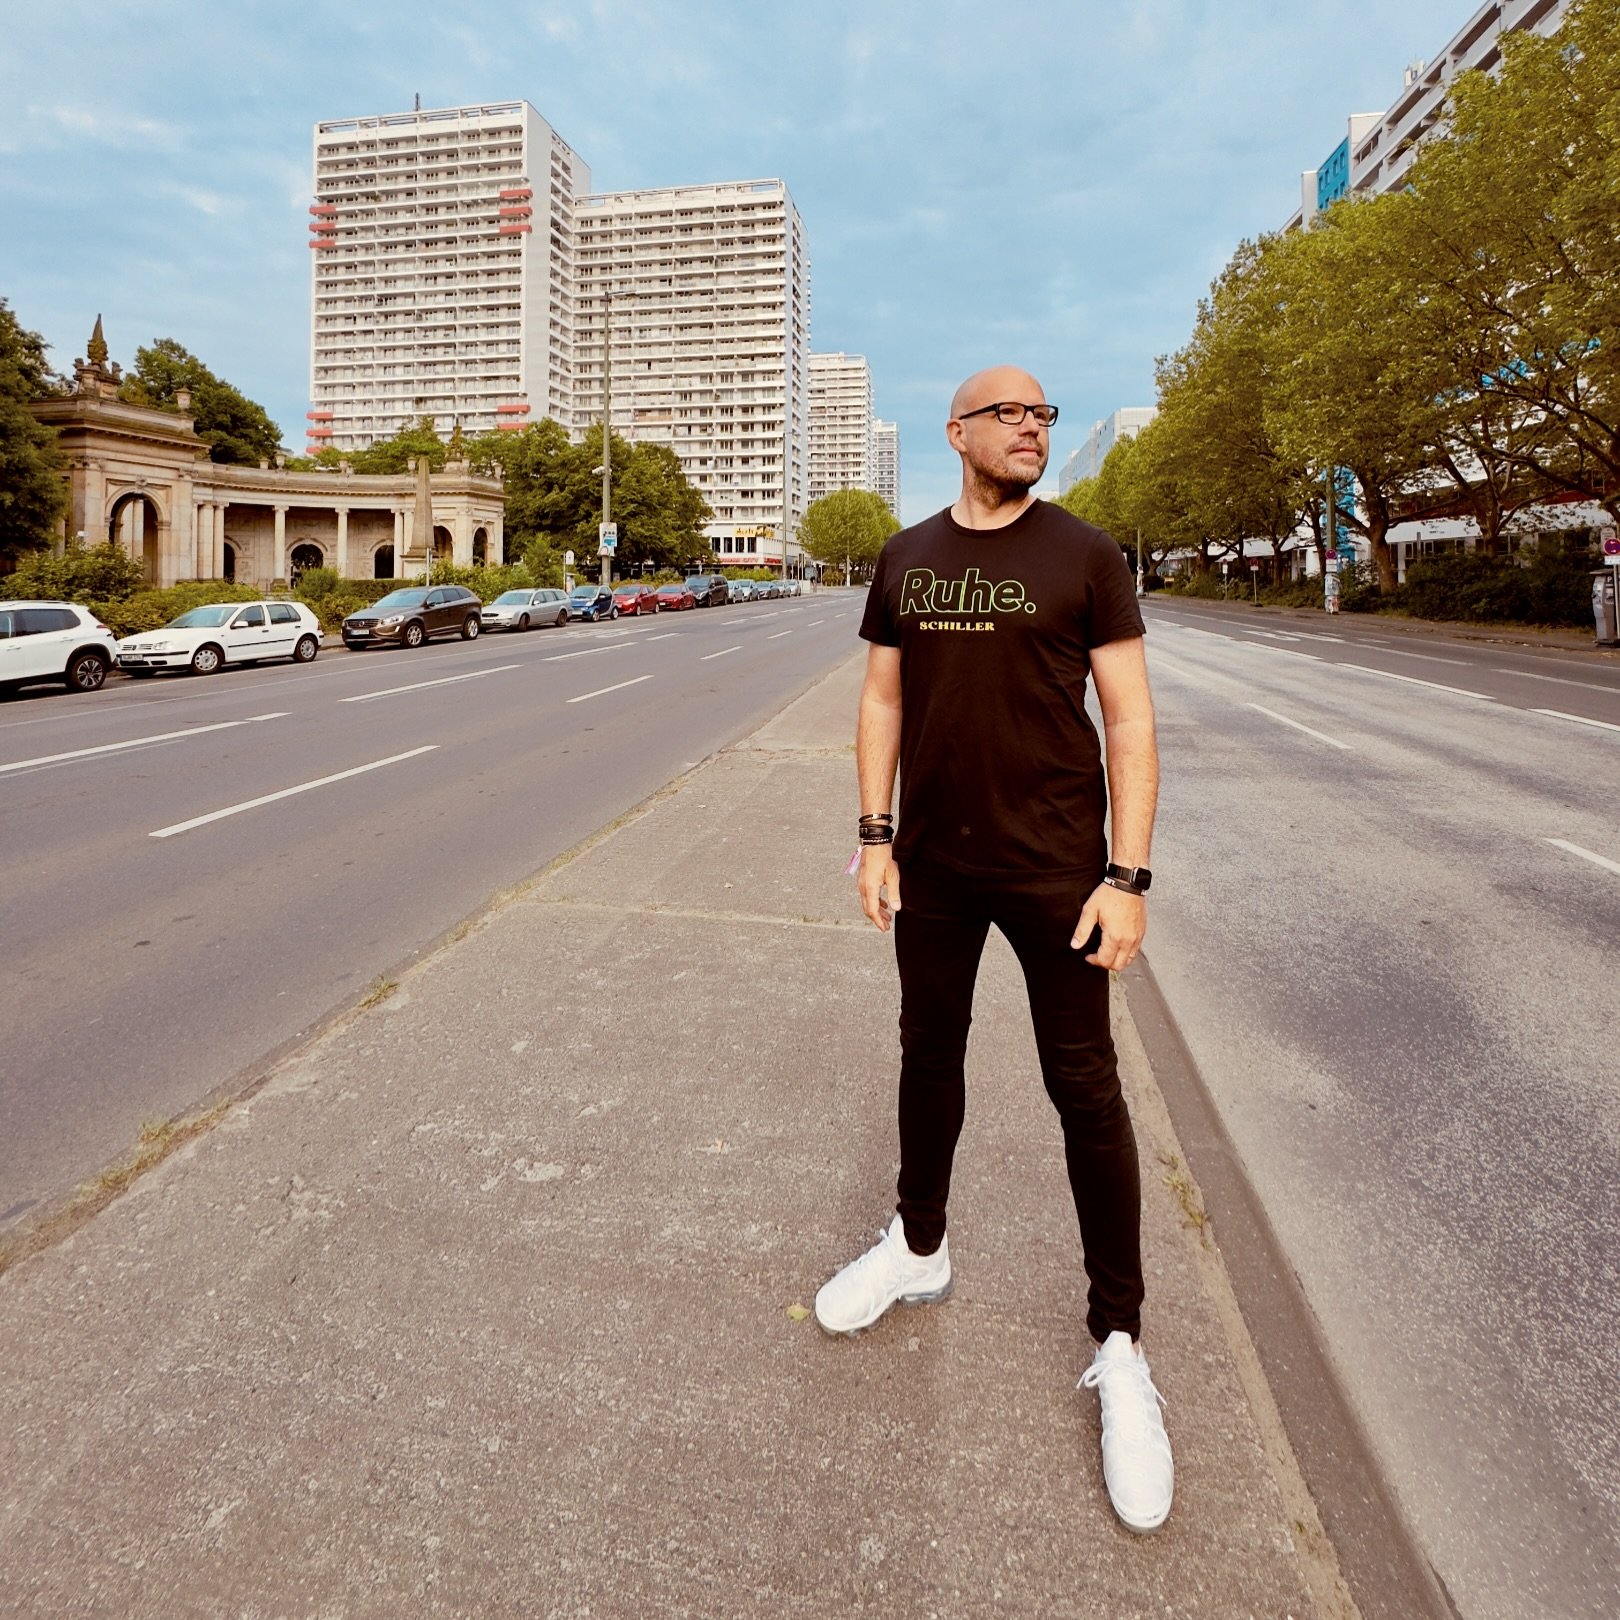 Summer in Berlin! This city can be very challenging during Winter. As soon as the sun comes out it provides a very special vibe which can be very rewarding. 

#schiller #summer #berlin #alphaville #happiness #thejourneycontinues #voyage #schillermusi